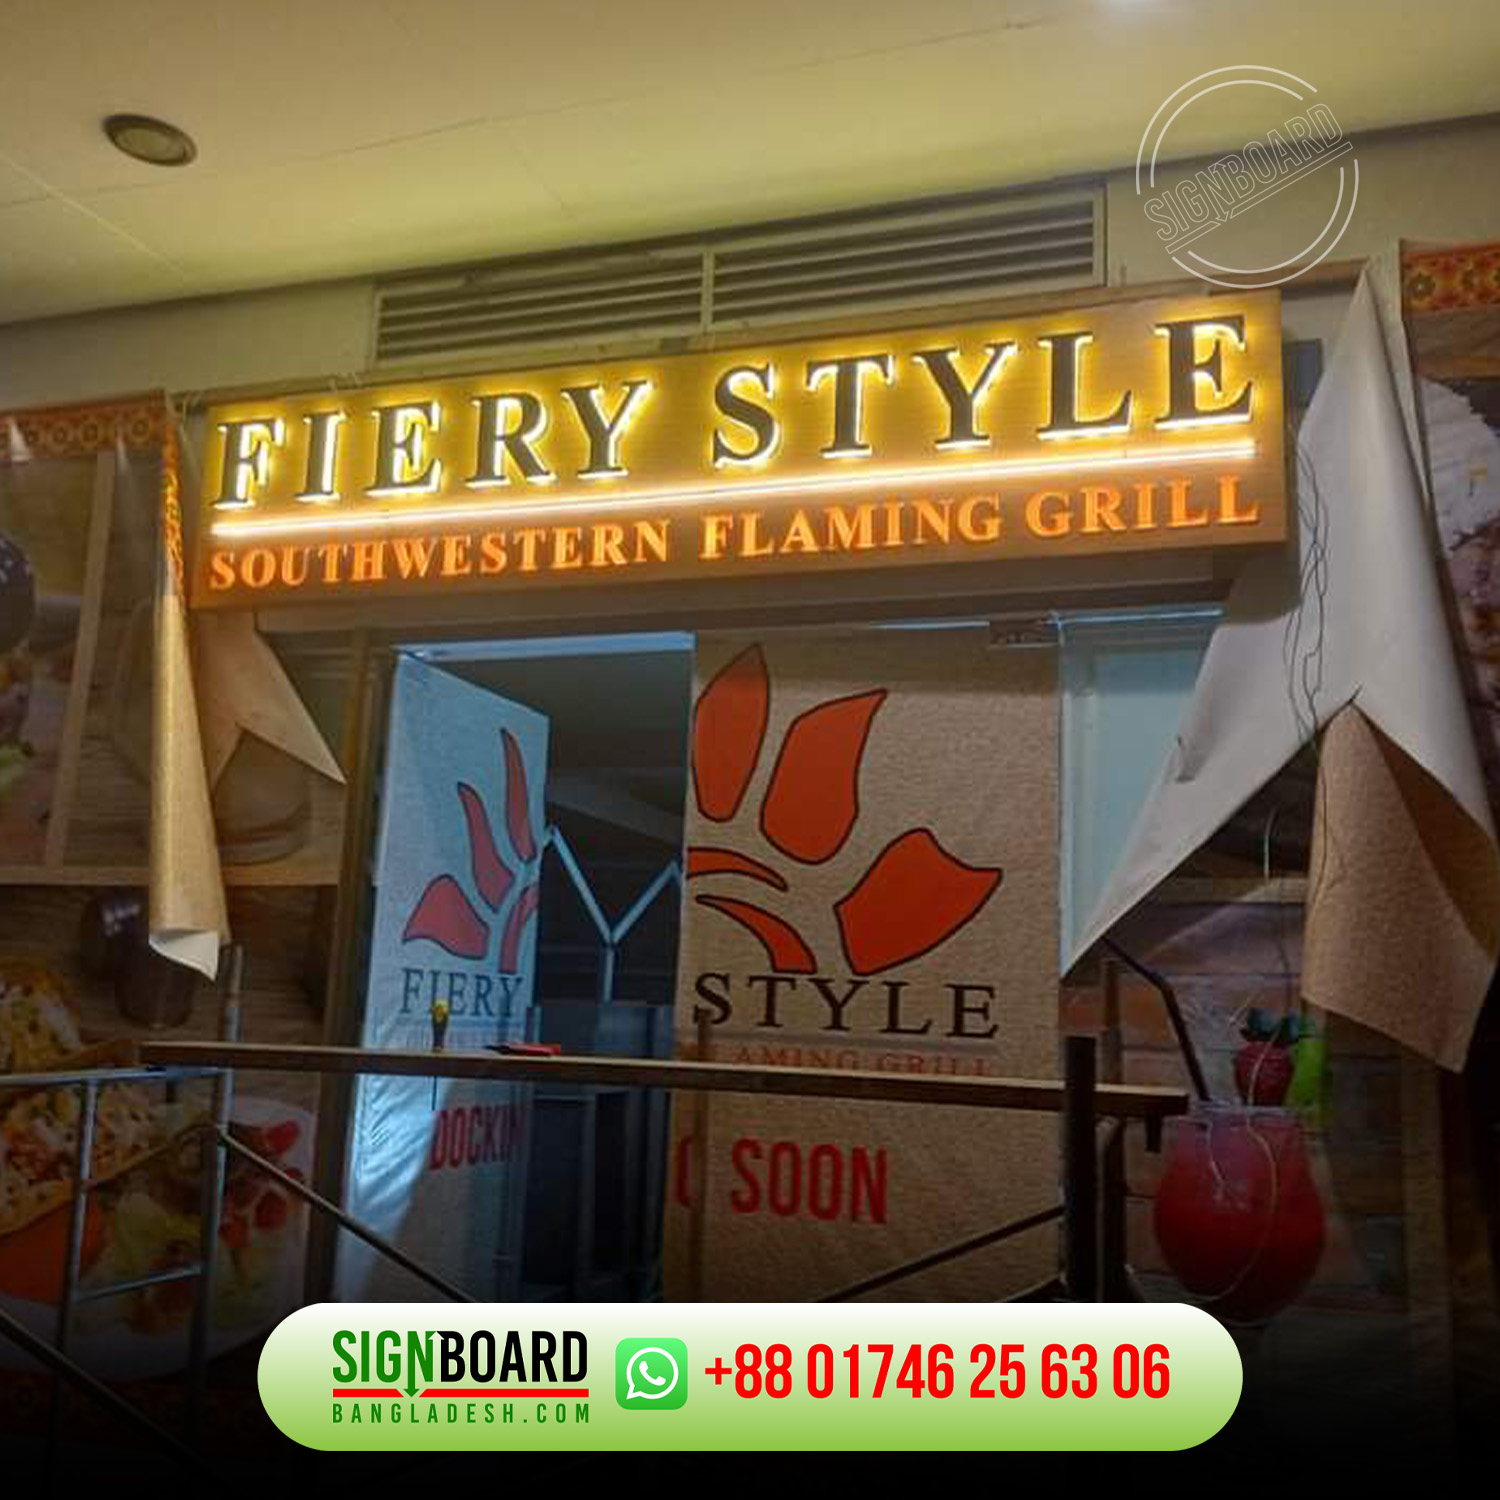 Products: All kind of Letter Signage(Acrylic, SS, Golden, Mirror), Digital Led Moving Display Billboard, Road And Highway Billboard, Neon Signs, Shop Signs, Profile Signboard, Pana Signboard, Nameplate, Wall Sticker, Glass Sticker.